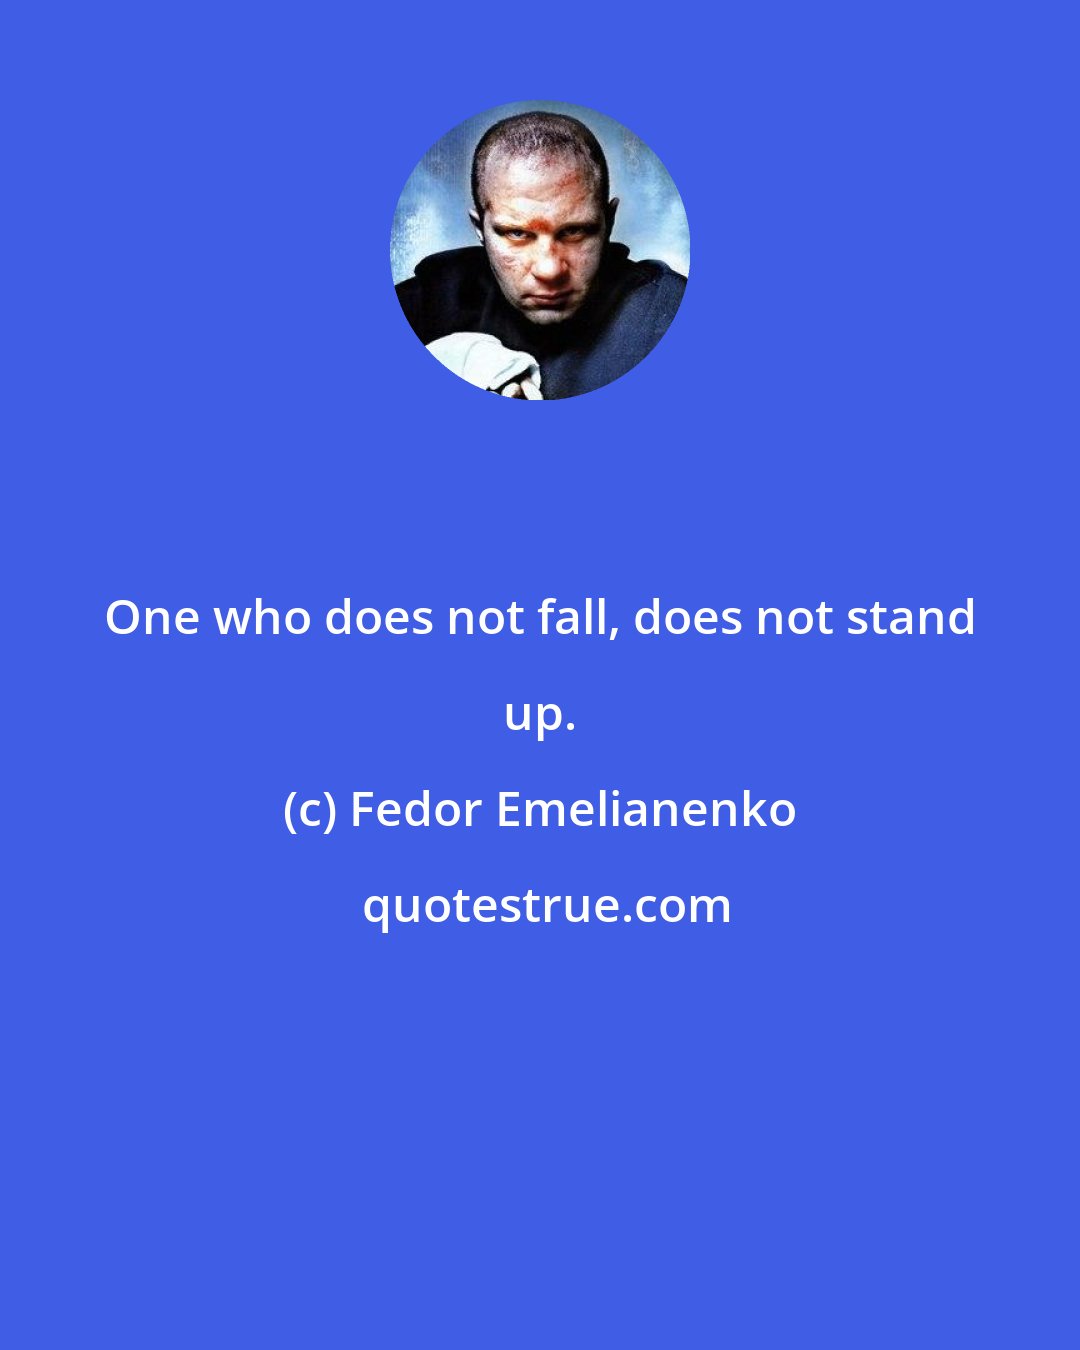 Fedor Emelianenko: One who does not fall, does not stand up.